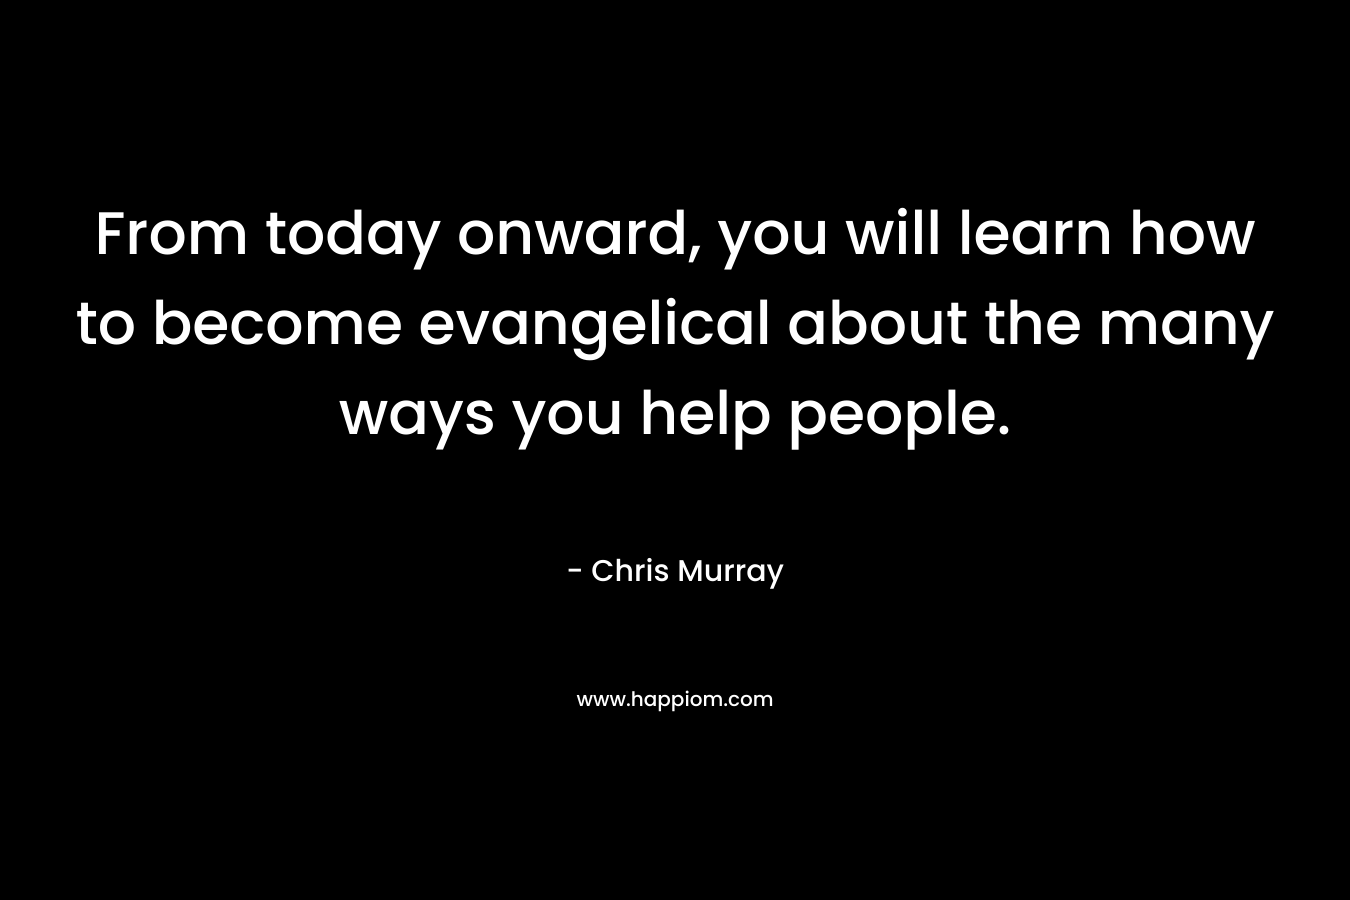 From today onward, you will learn how to become evangelical about the many ways you help people.